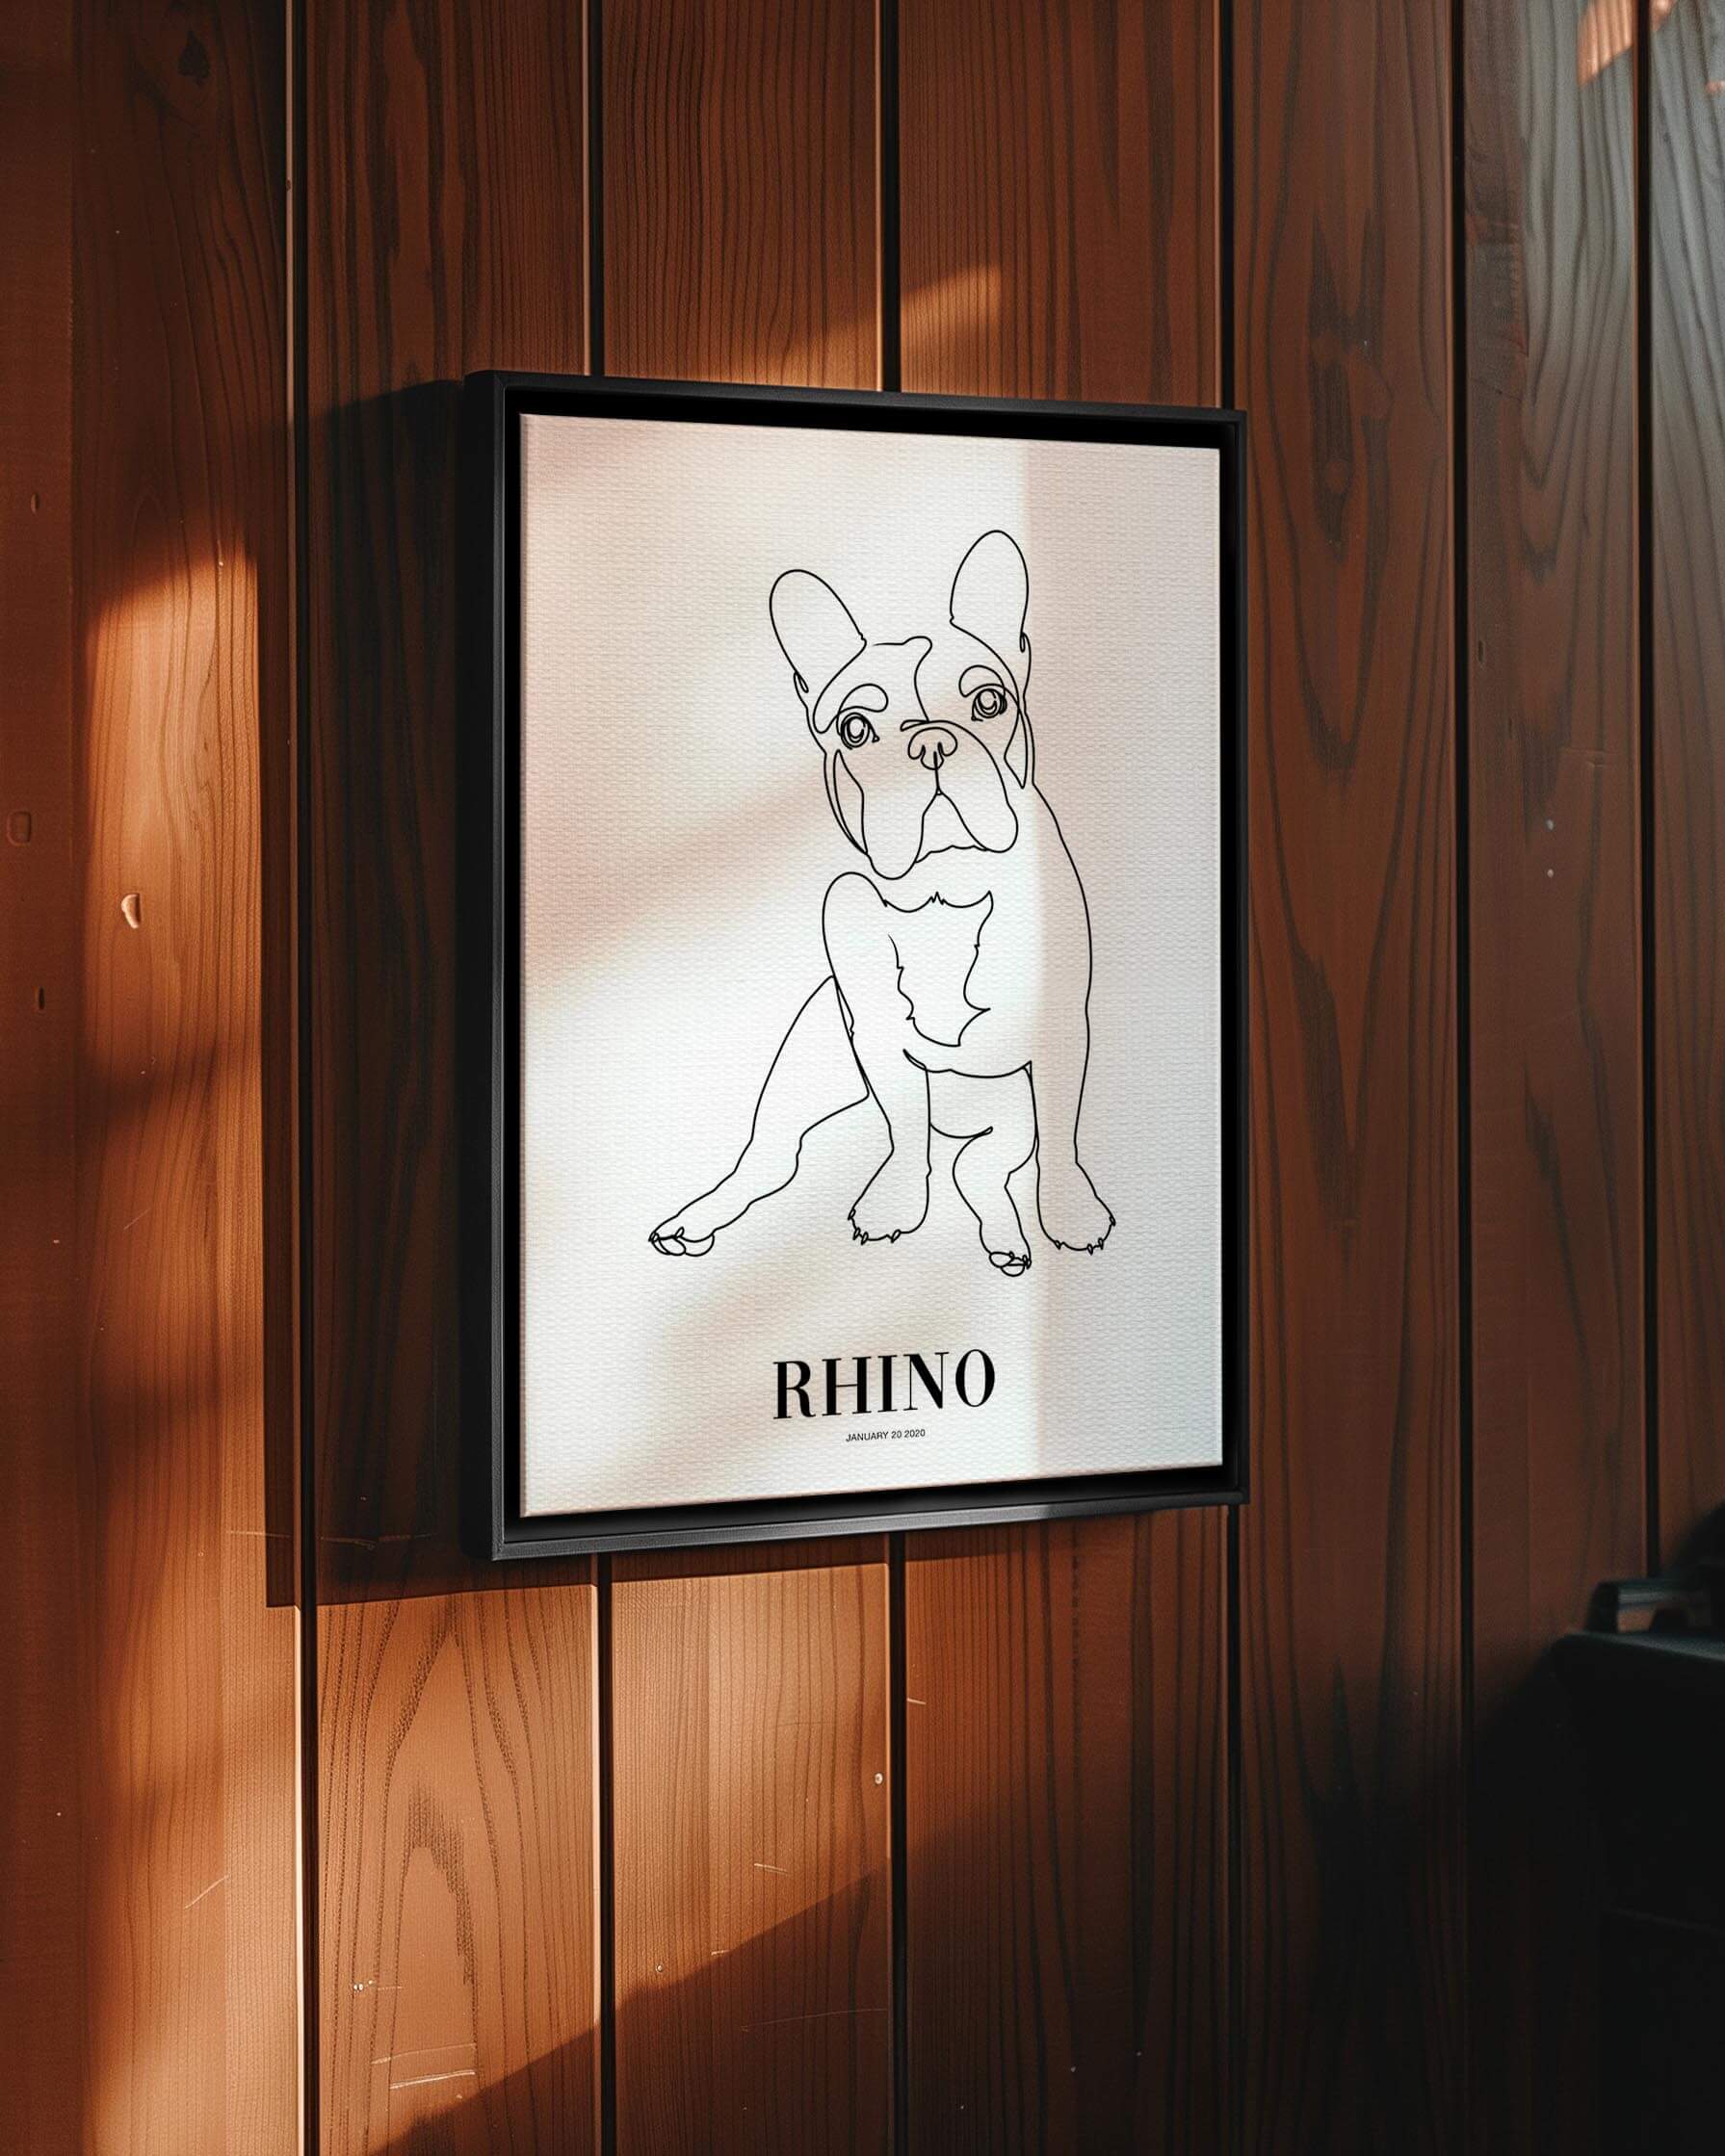 french bulldog print line drawing custom art on canvas and mounted on wall of contemporary home decor living space creating a unique custom gift idea for dog mom and dog dad pet parents made by vogue paws personalized pet portrait dog art